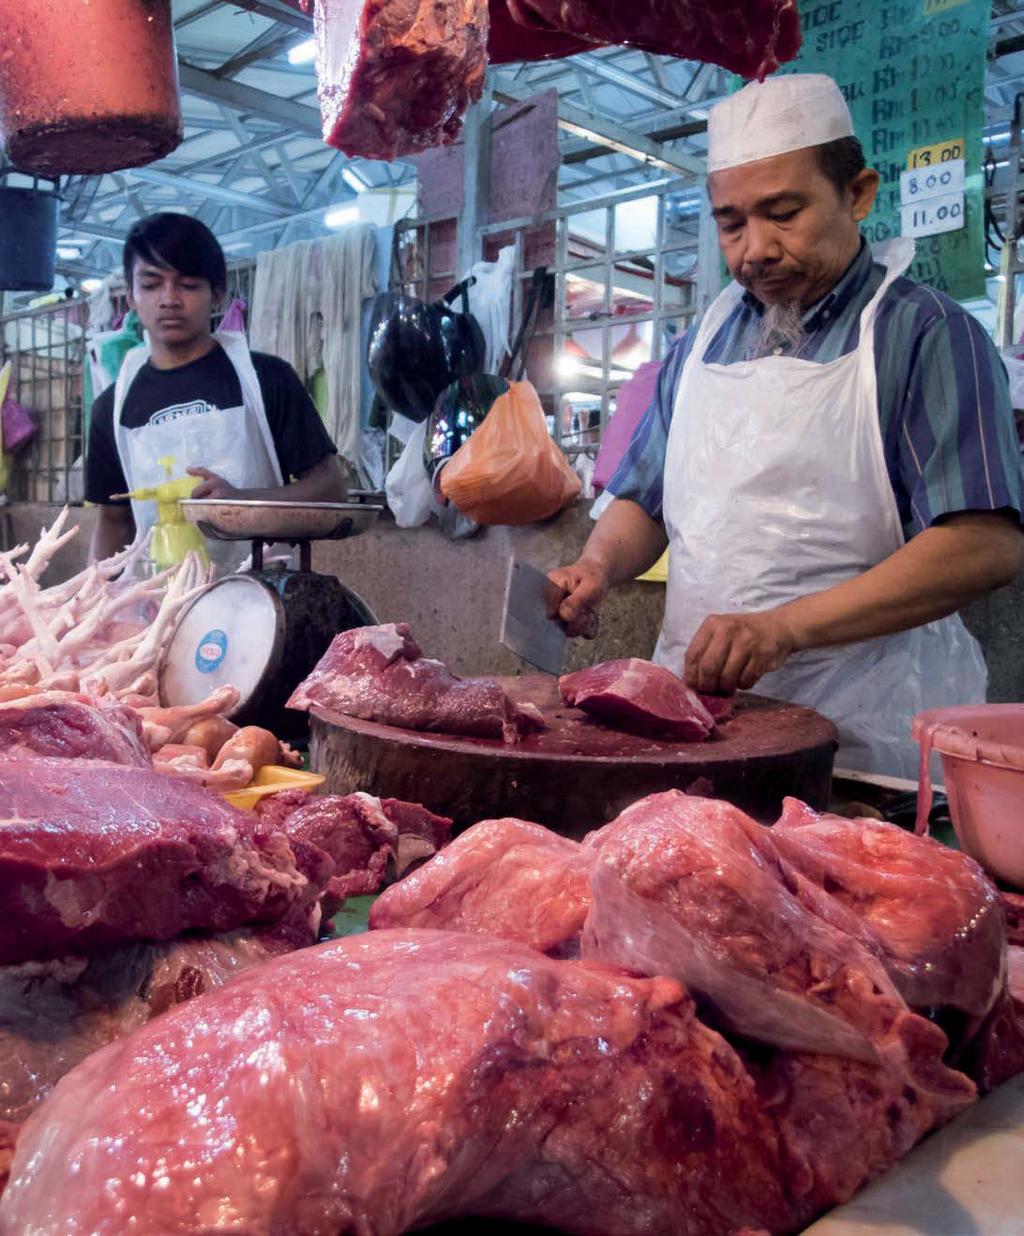 Men selling halal meat at their stall in Chow